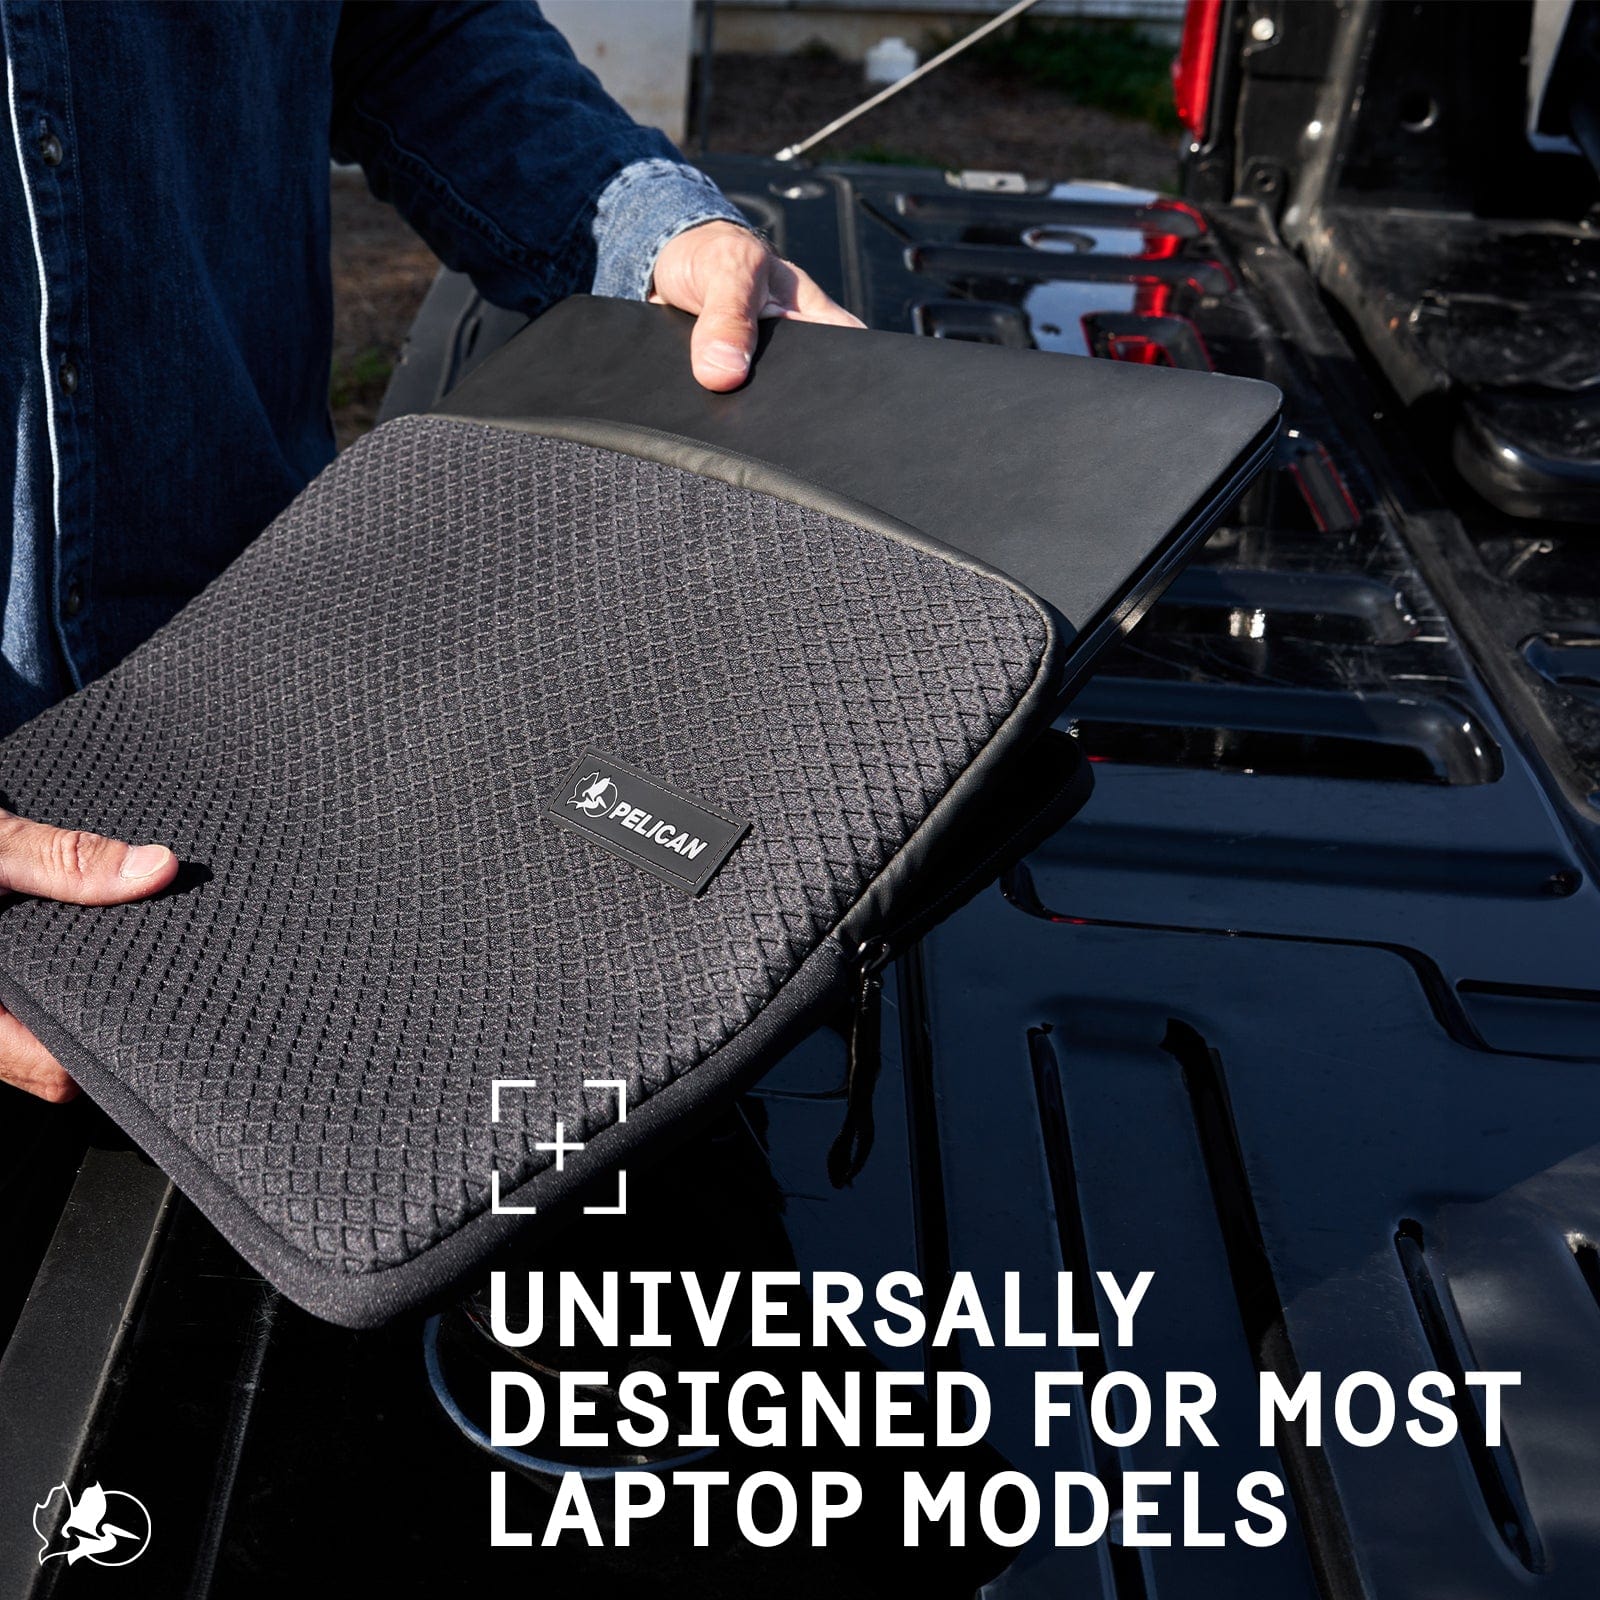 UNIVERSALLY DESIGNED FOR MOST LAPTOP MODELS